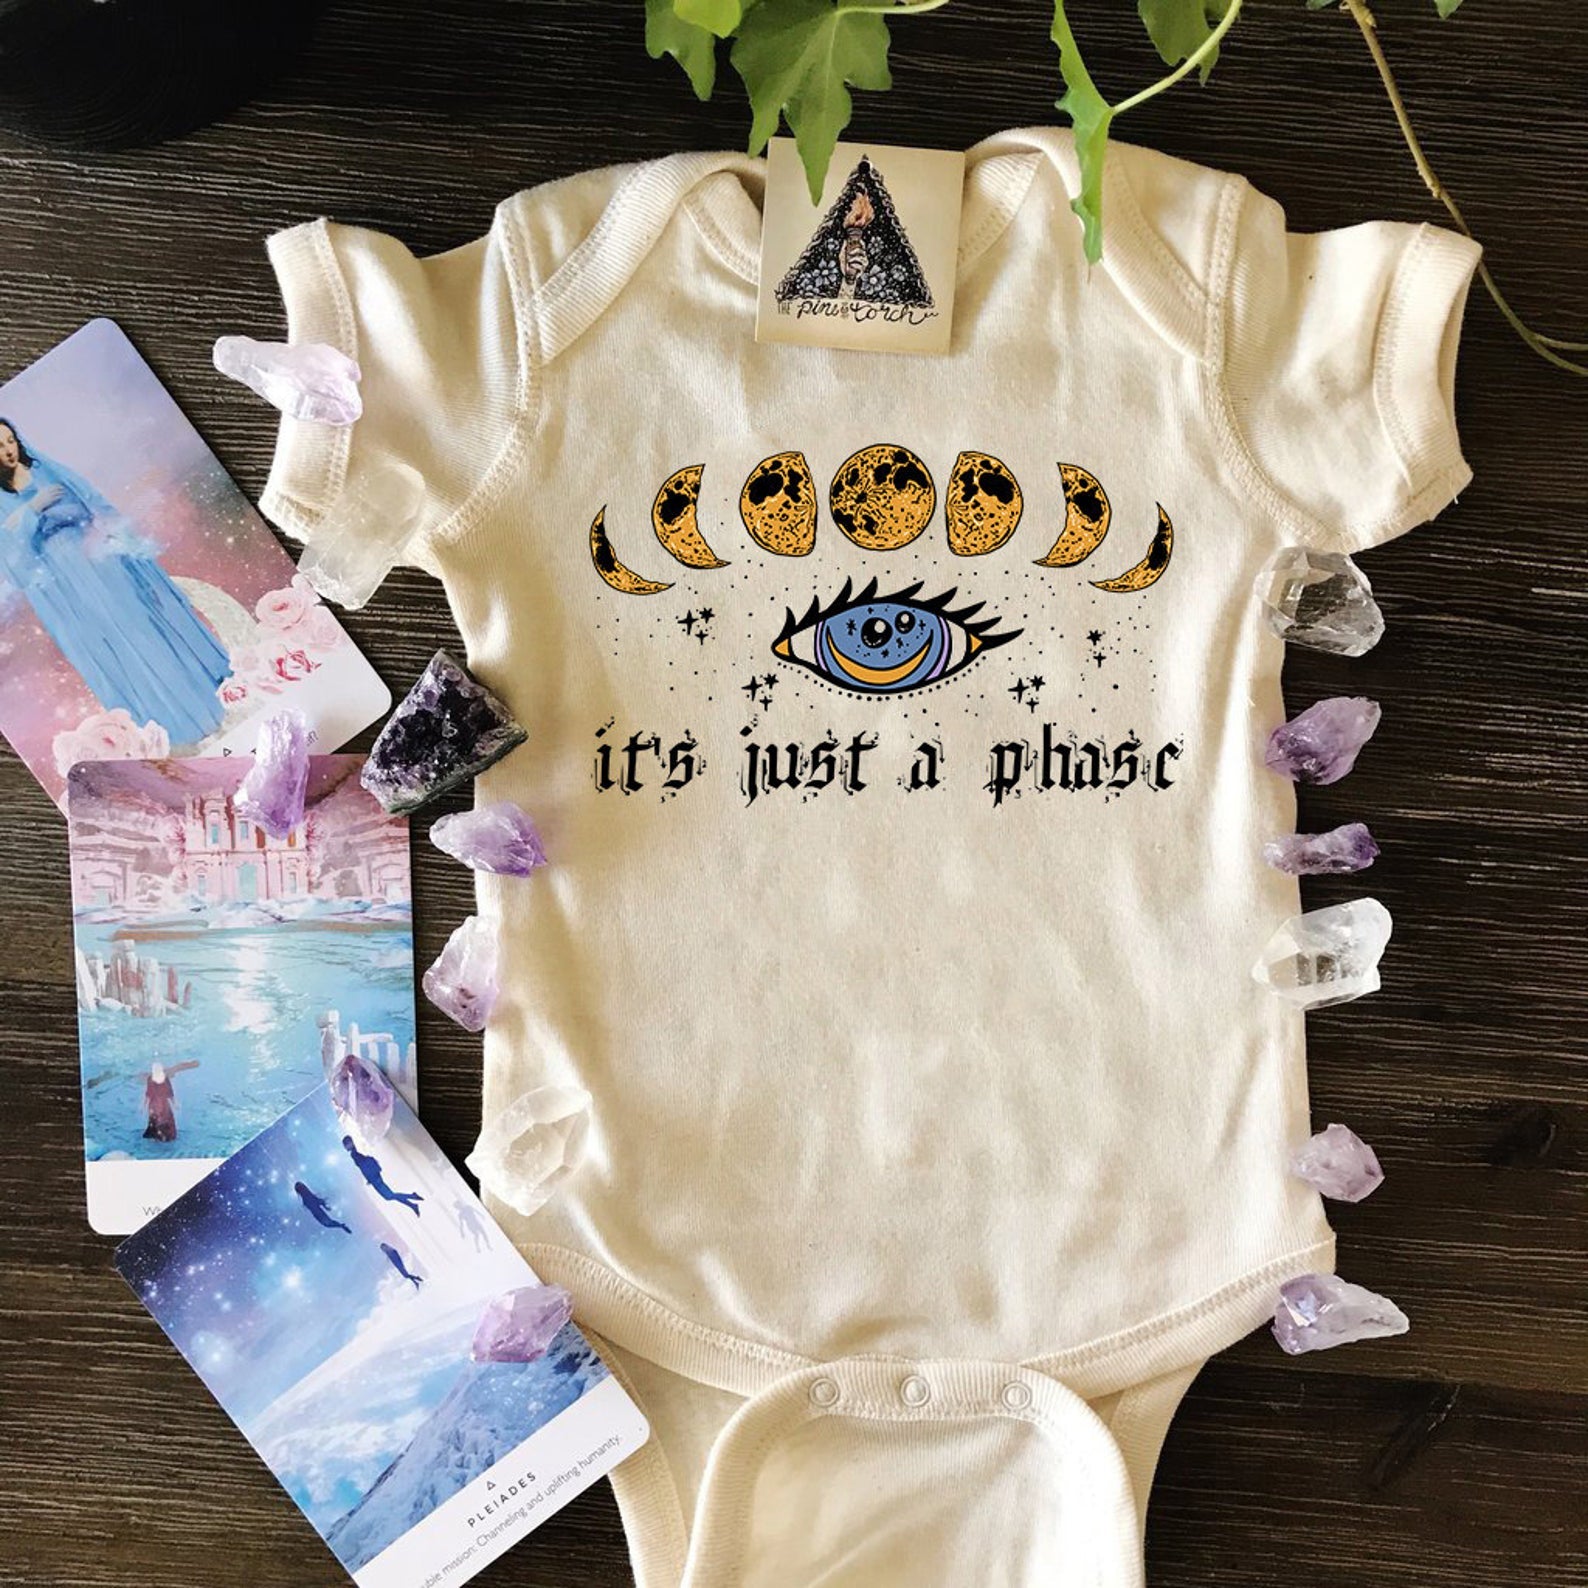 « IT'S JUST A PHASE » BODYSUIT